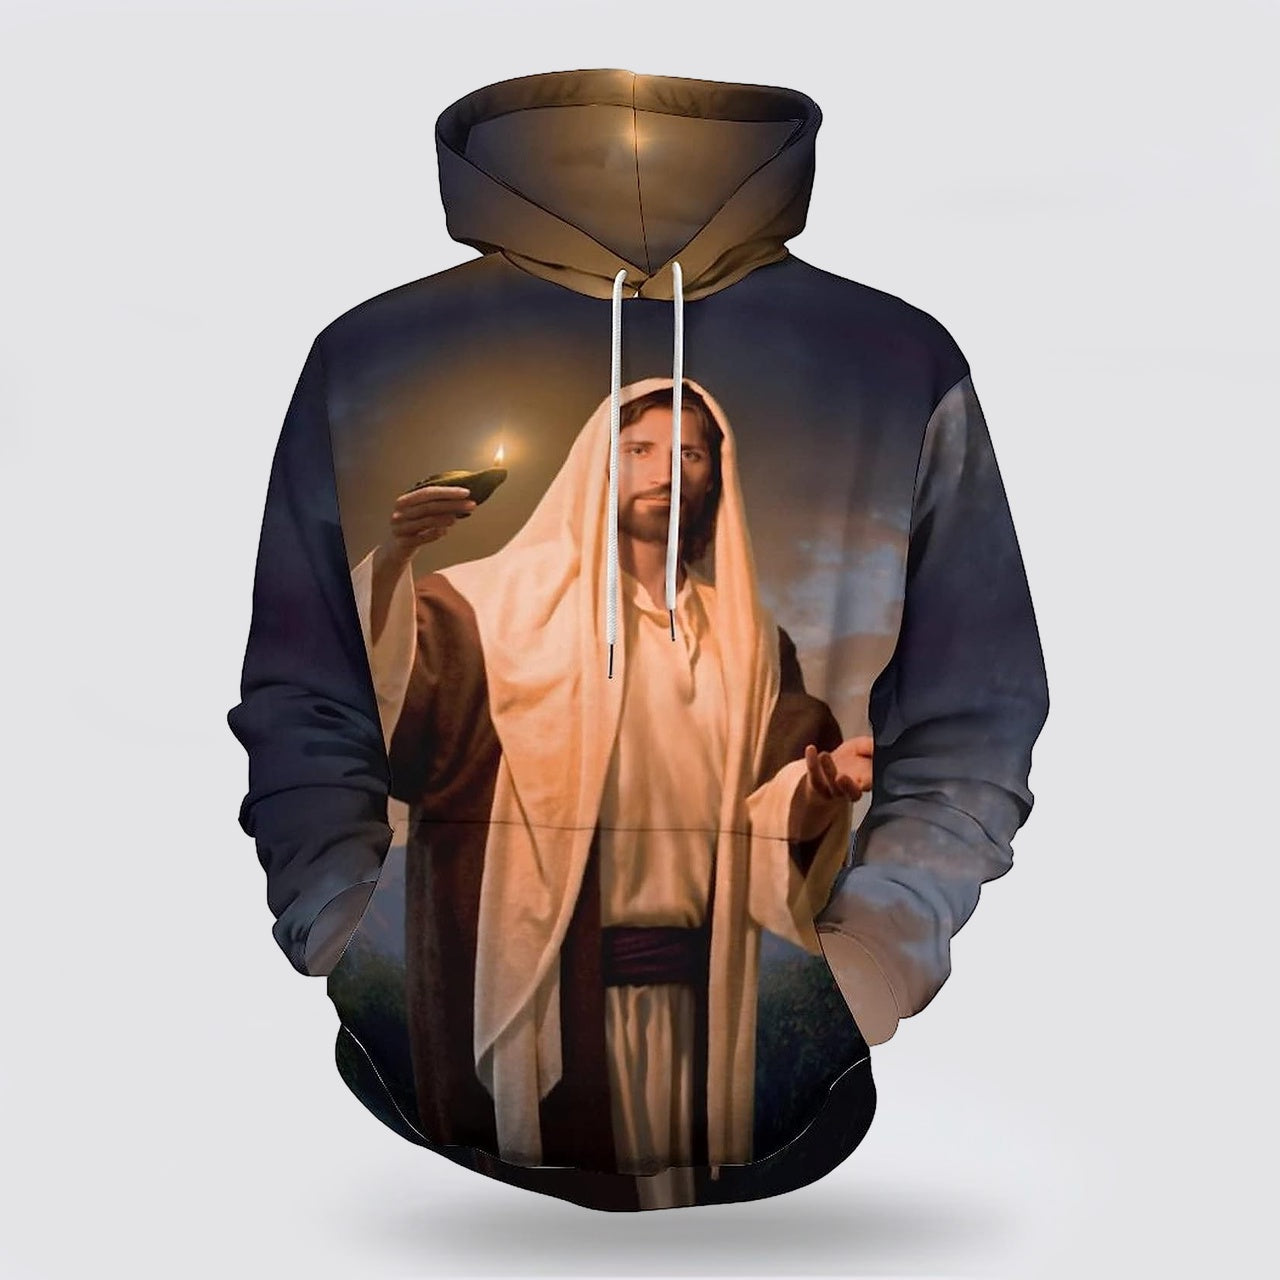 Jesus Holding Candle 3d Hoodies For Women Men - Christian Apparel Hoodies